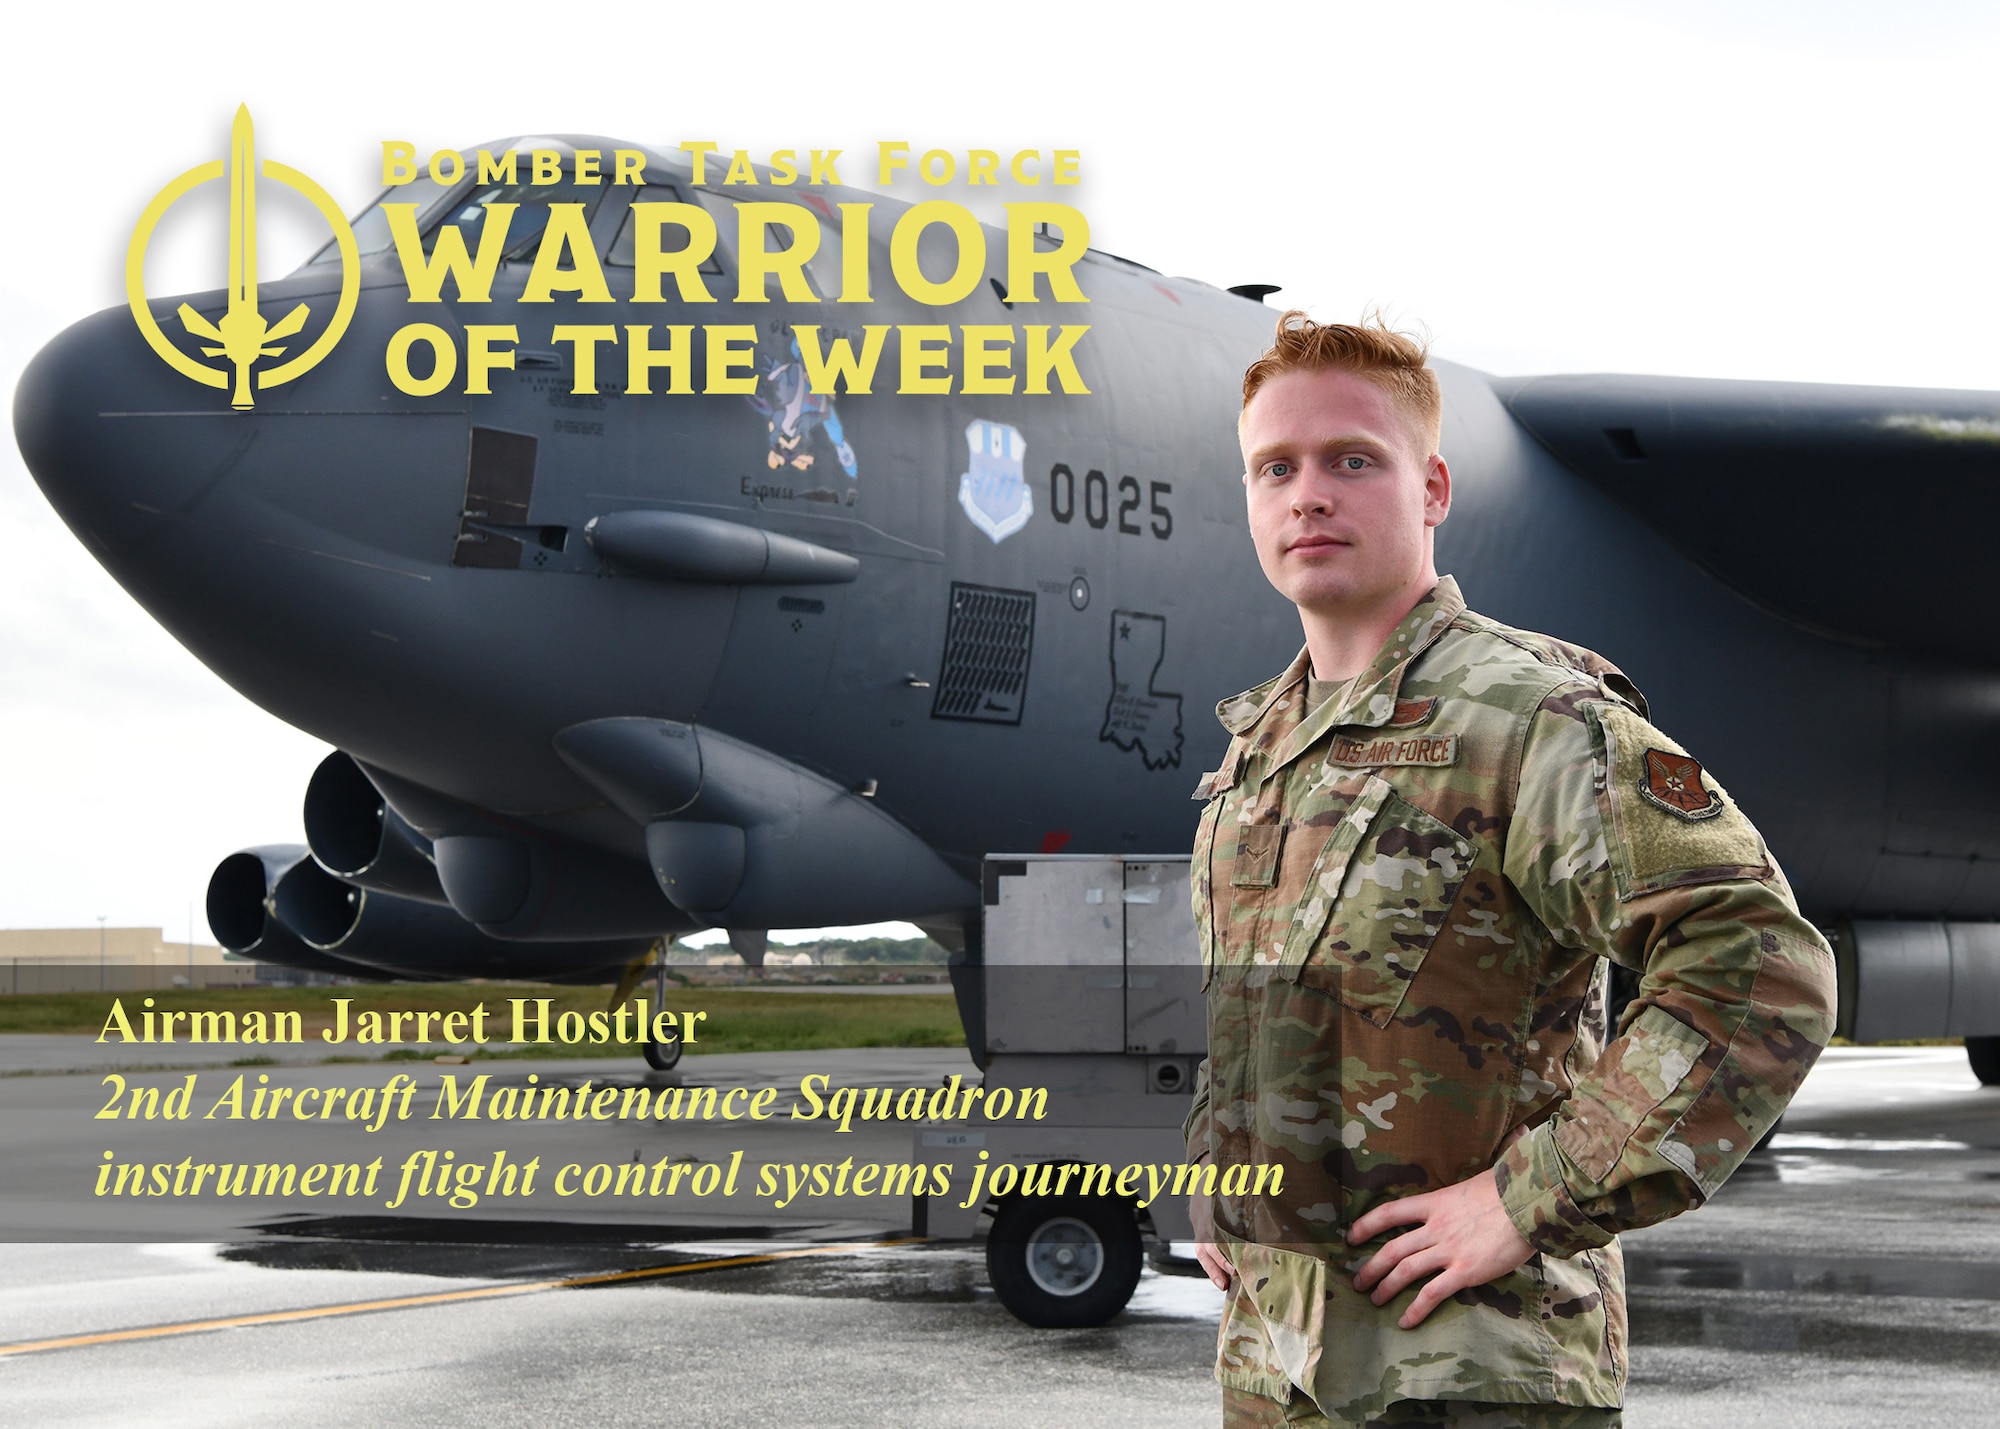 Graphic of a U.S. Air Force Airman for a BTF-21 Warrior of the Week Award